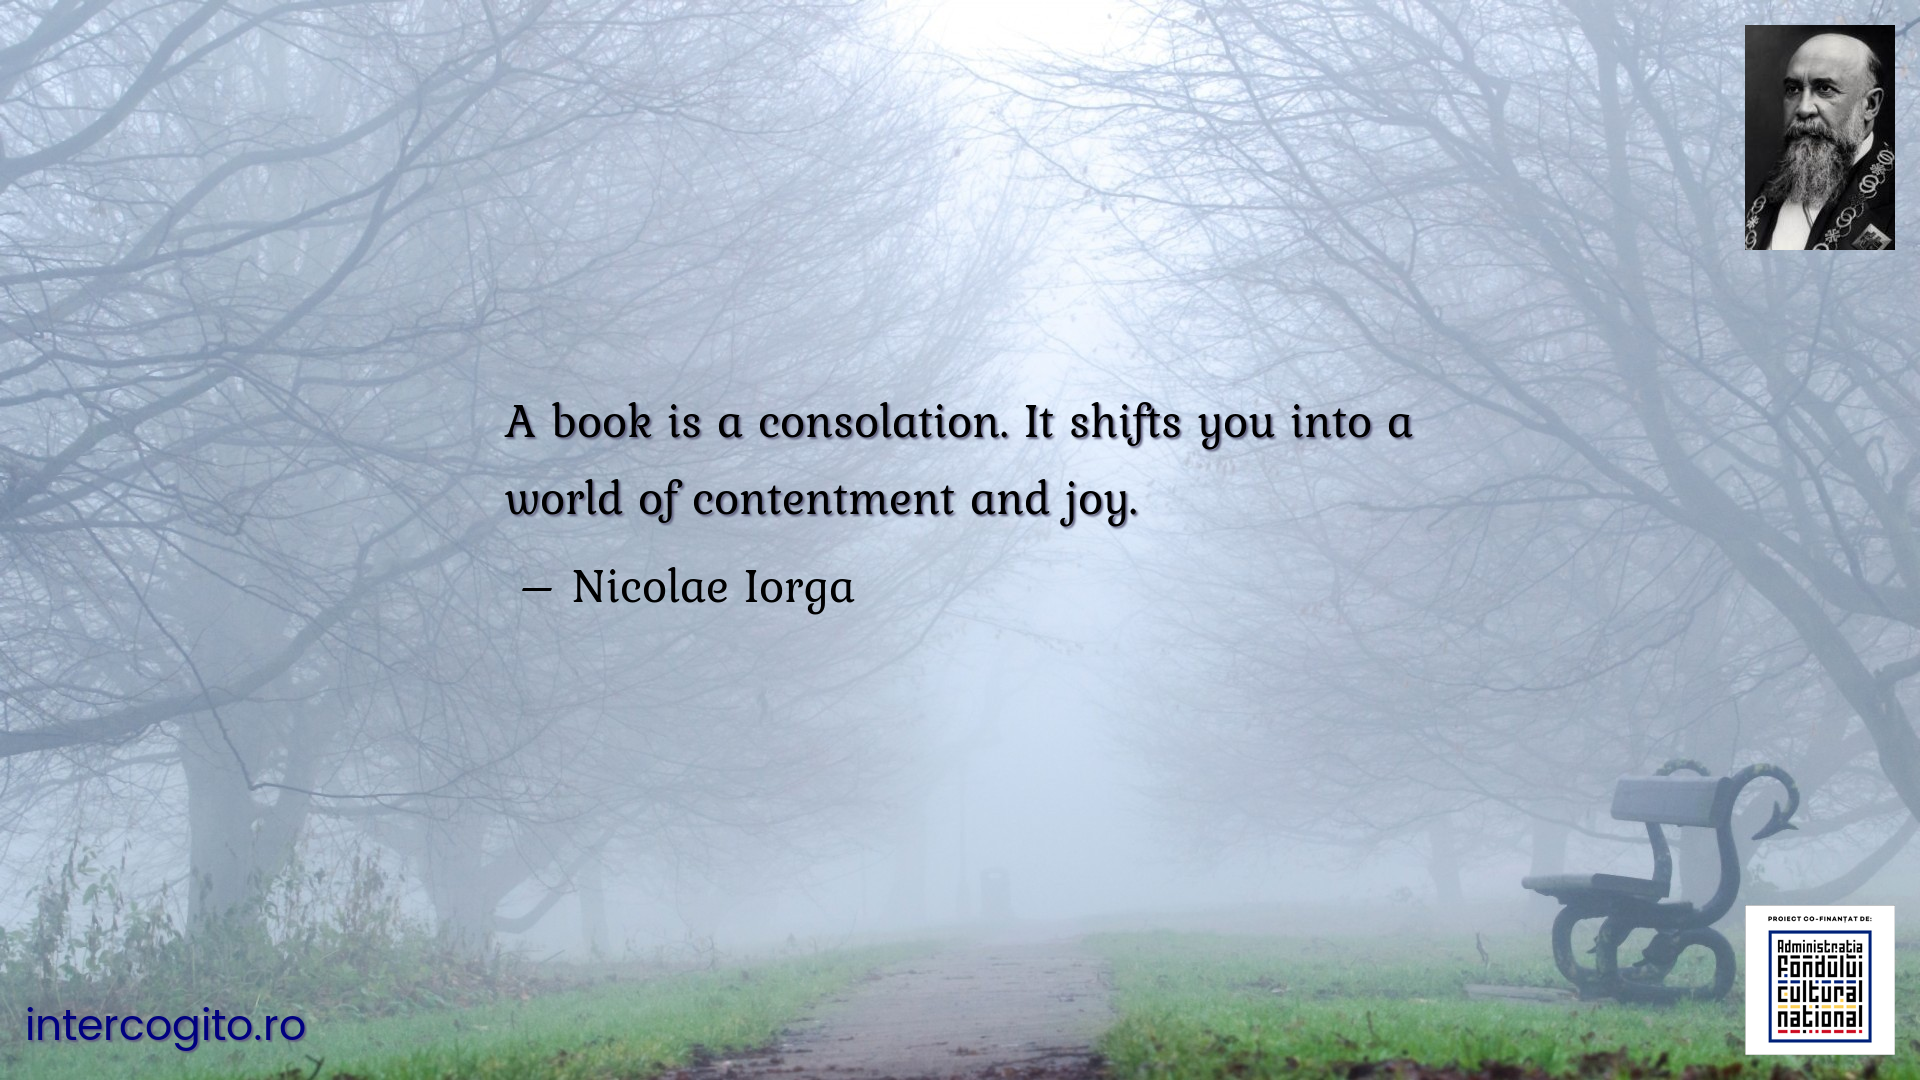 A book is a consolation. It shifts you into a world of contentment and joy.